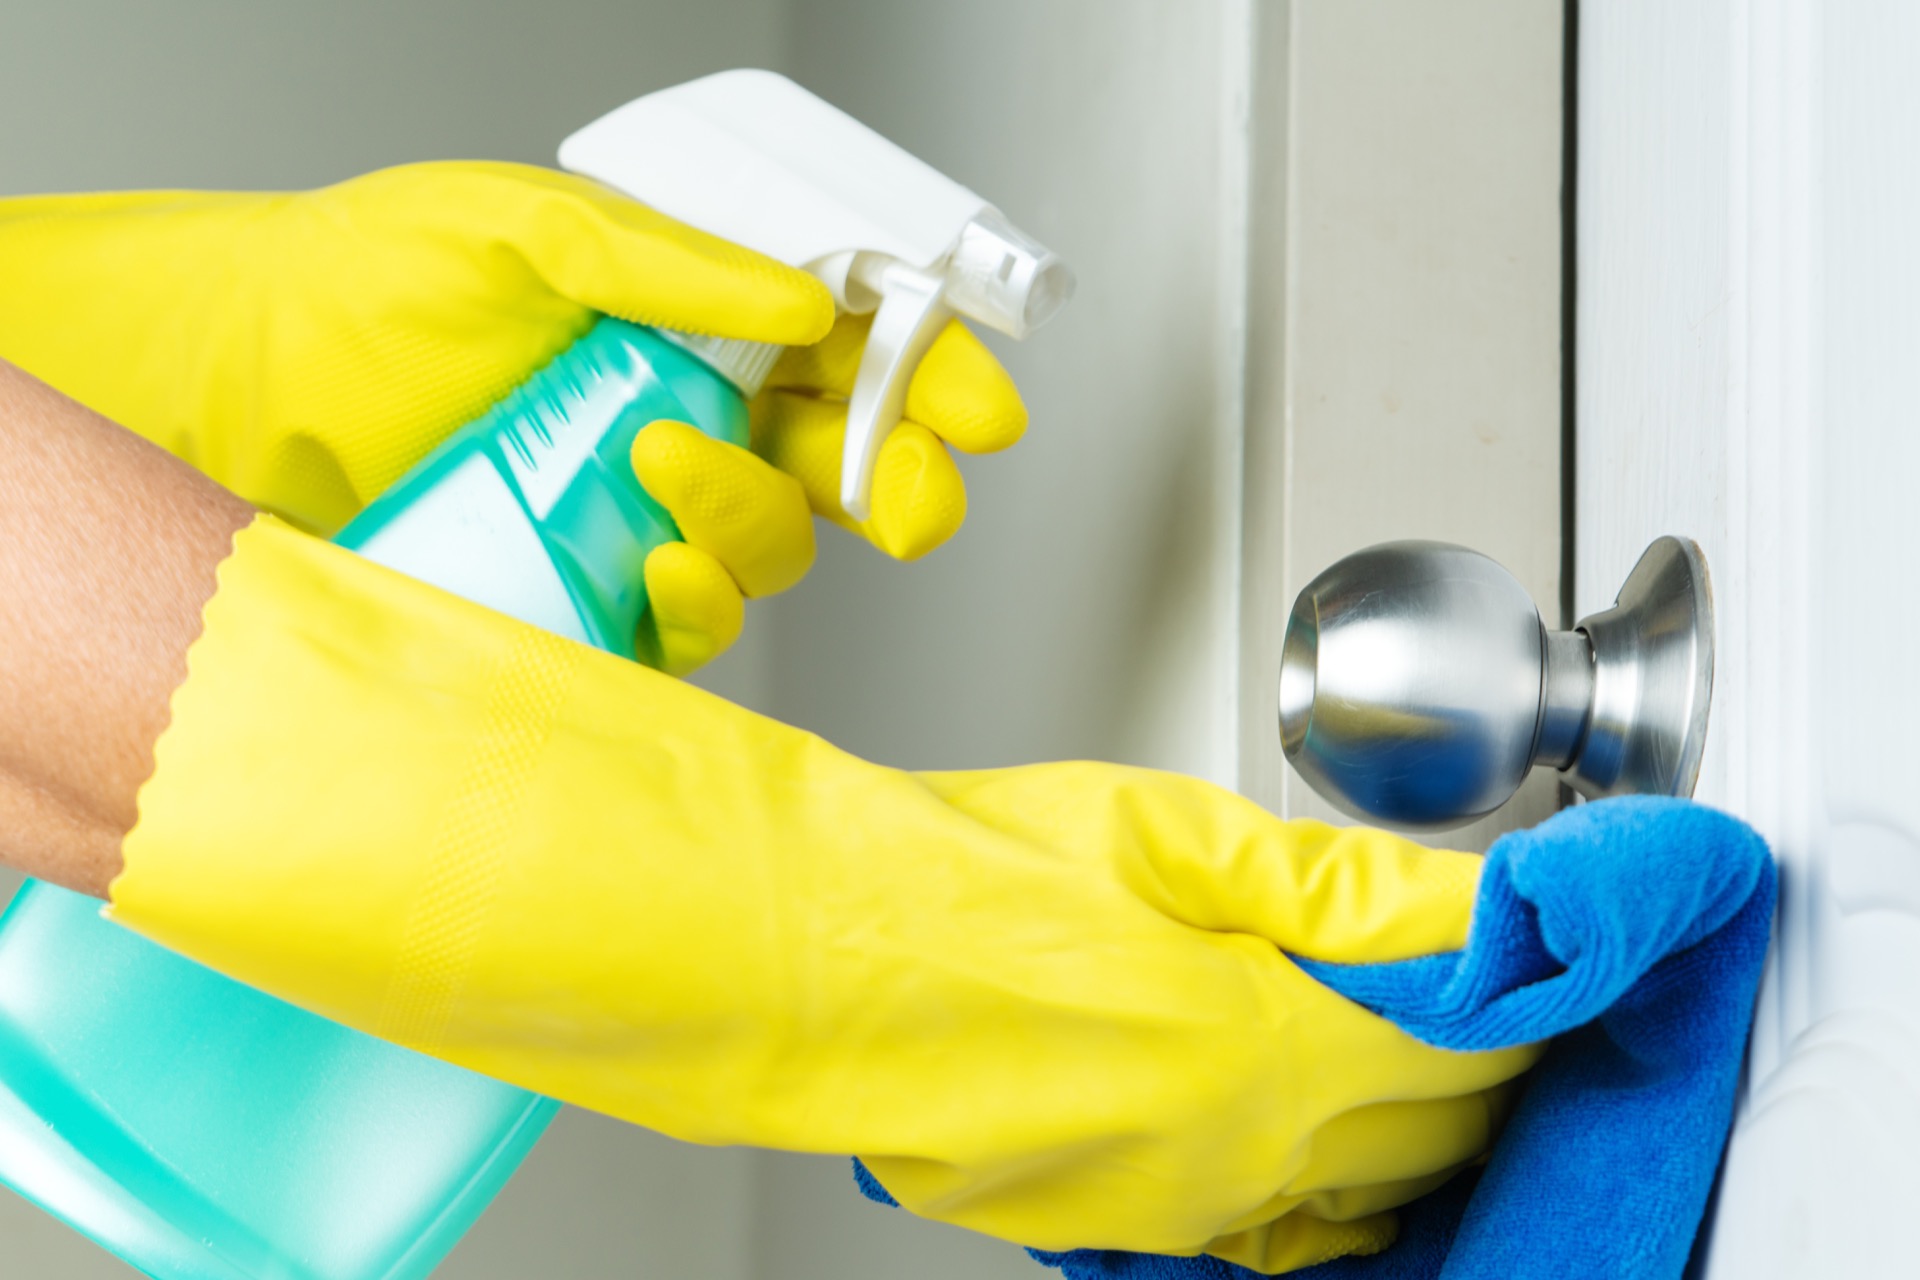 Cleaning door knob with disinfectant for coronavirus